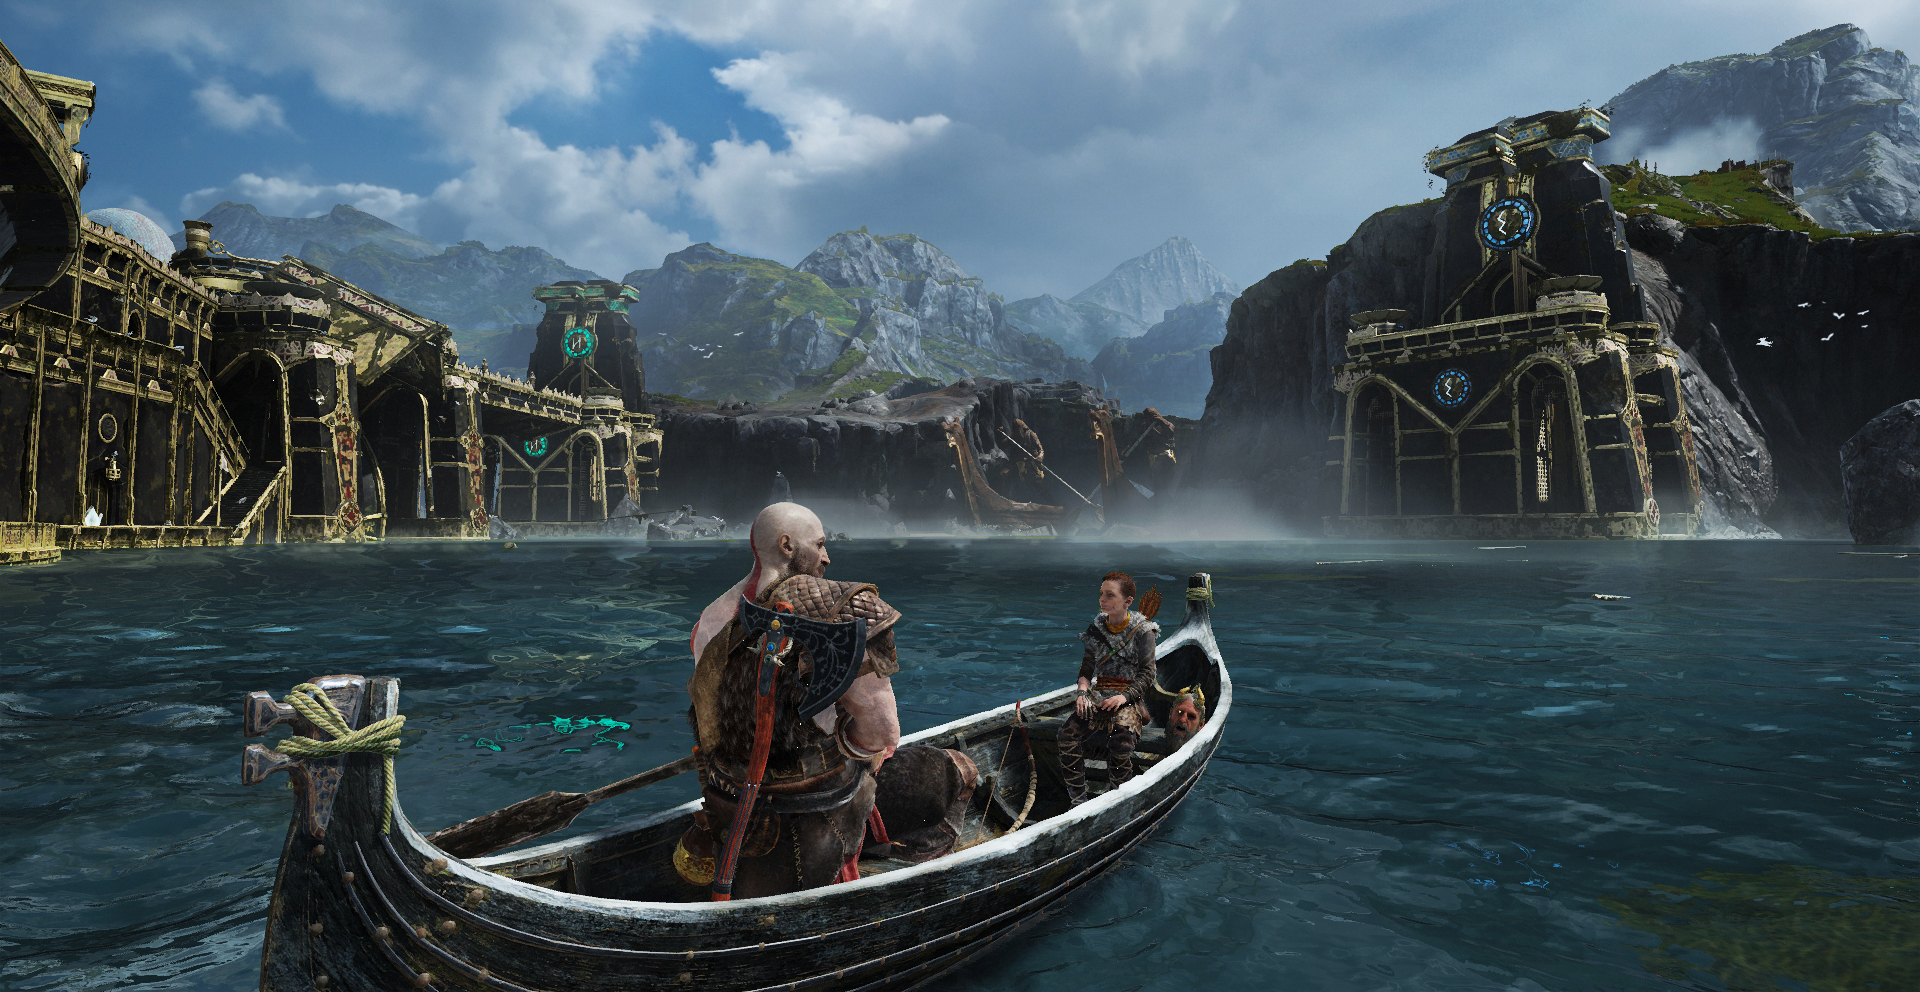 God of War on PC delivers nearly everything we'd hoped for